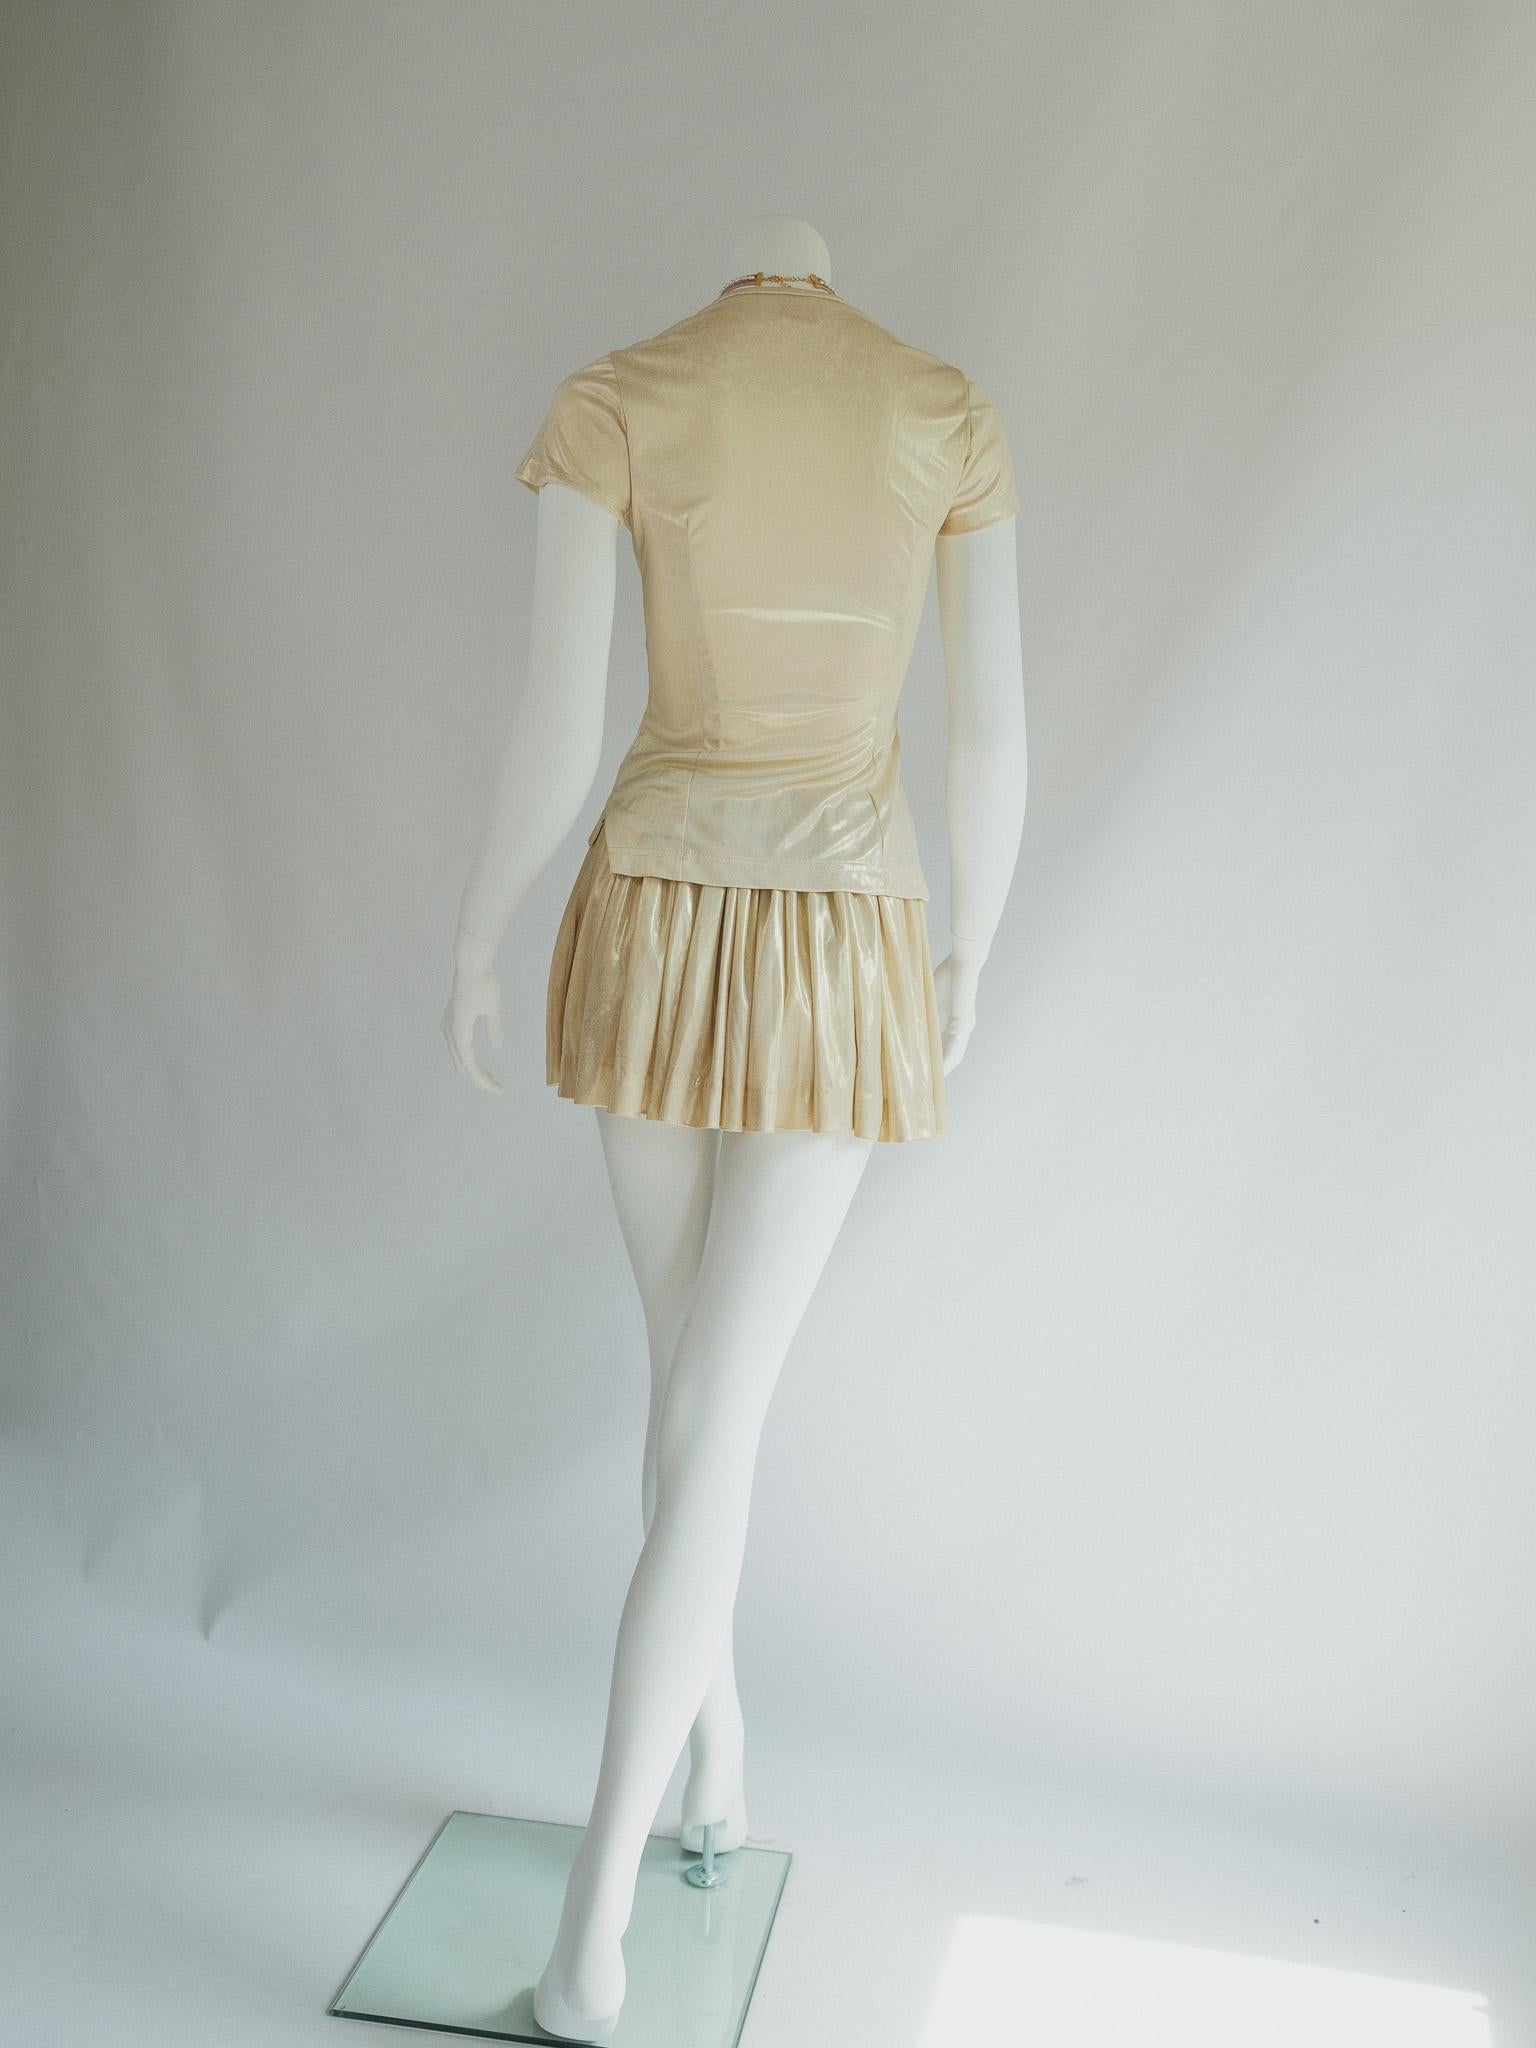 Vivienne Westwood 1988 SS Pagan Collection 80s Gold Mini Skirt Set XS 6